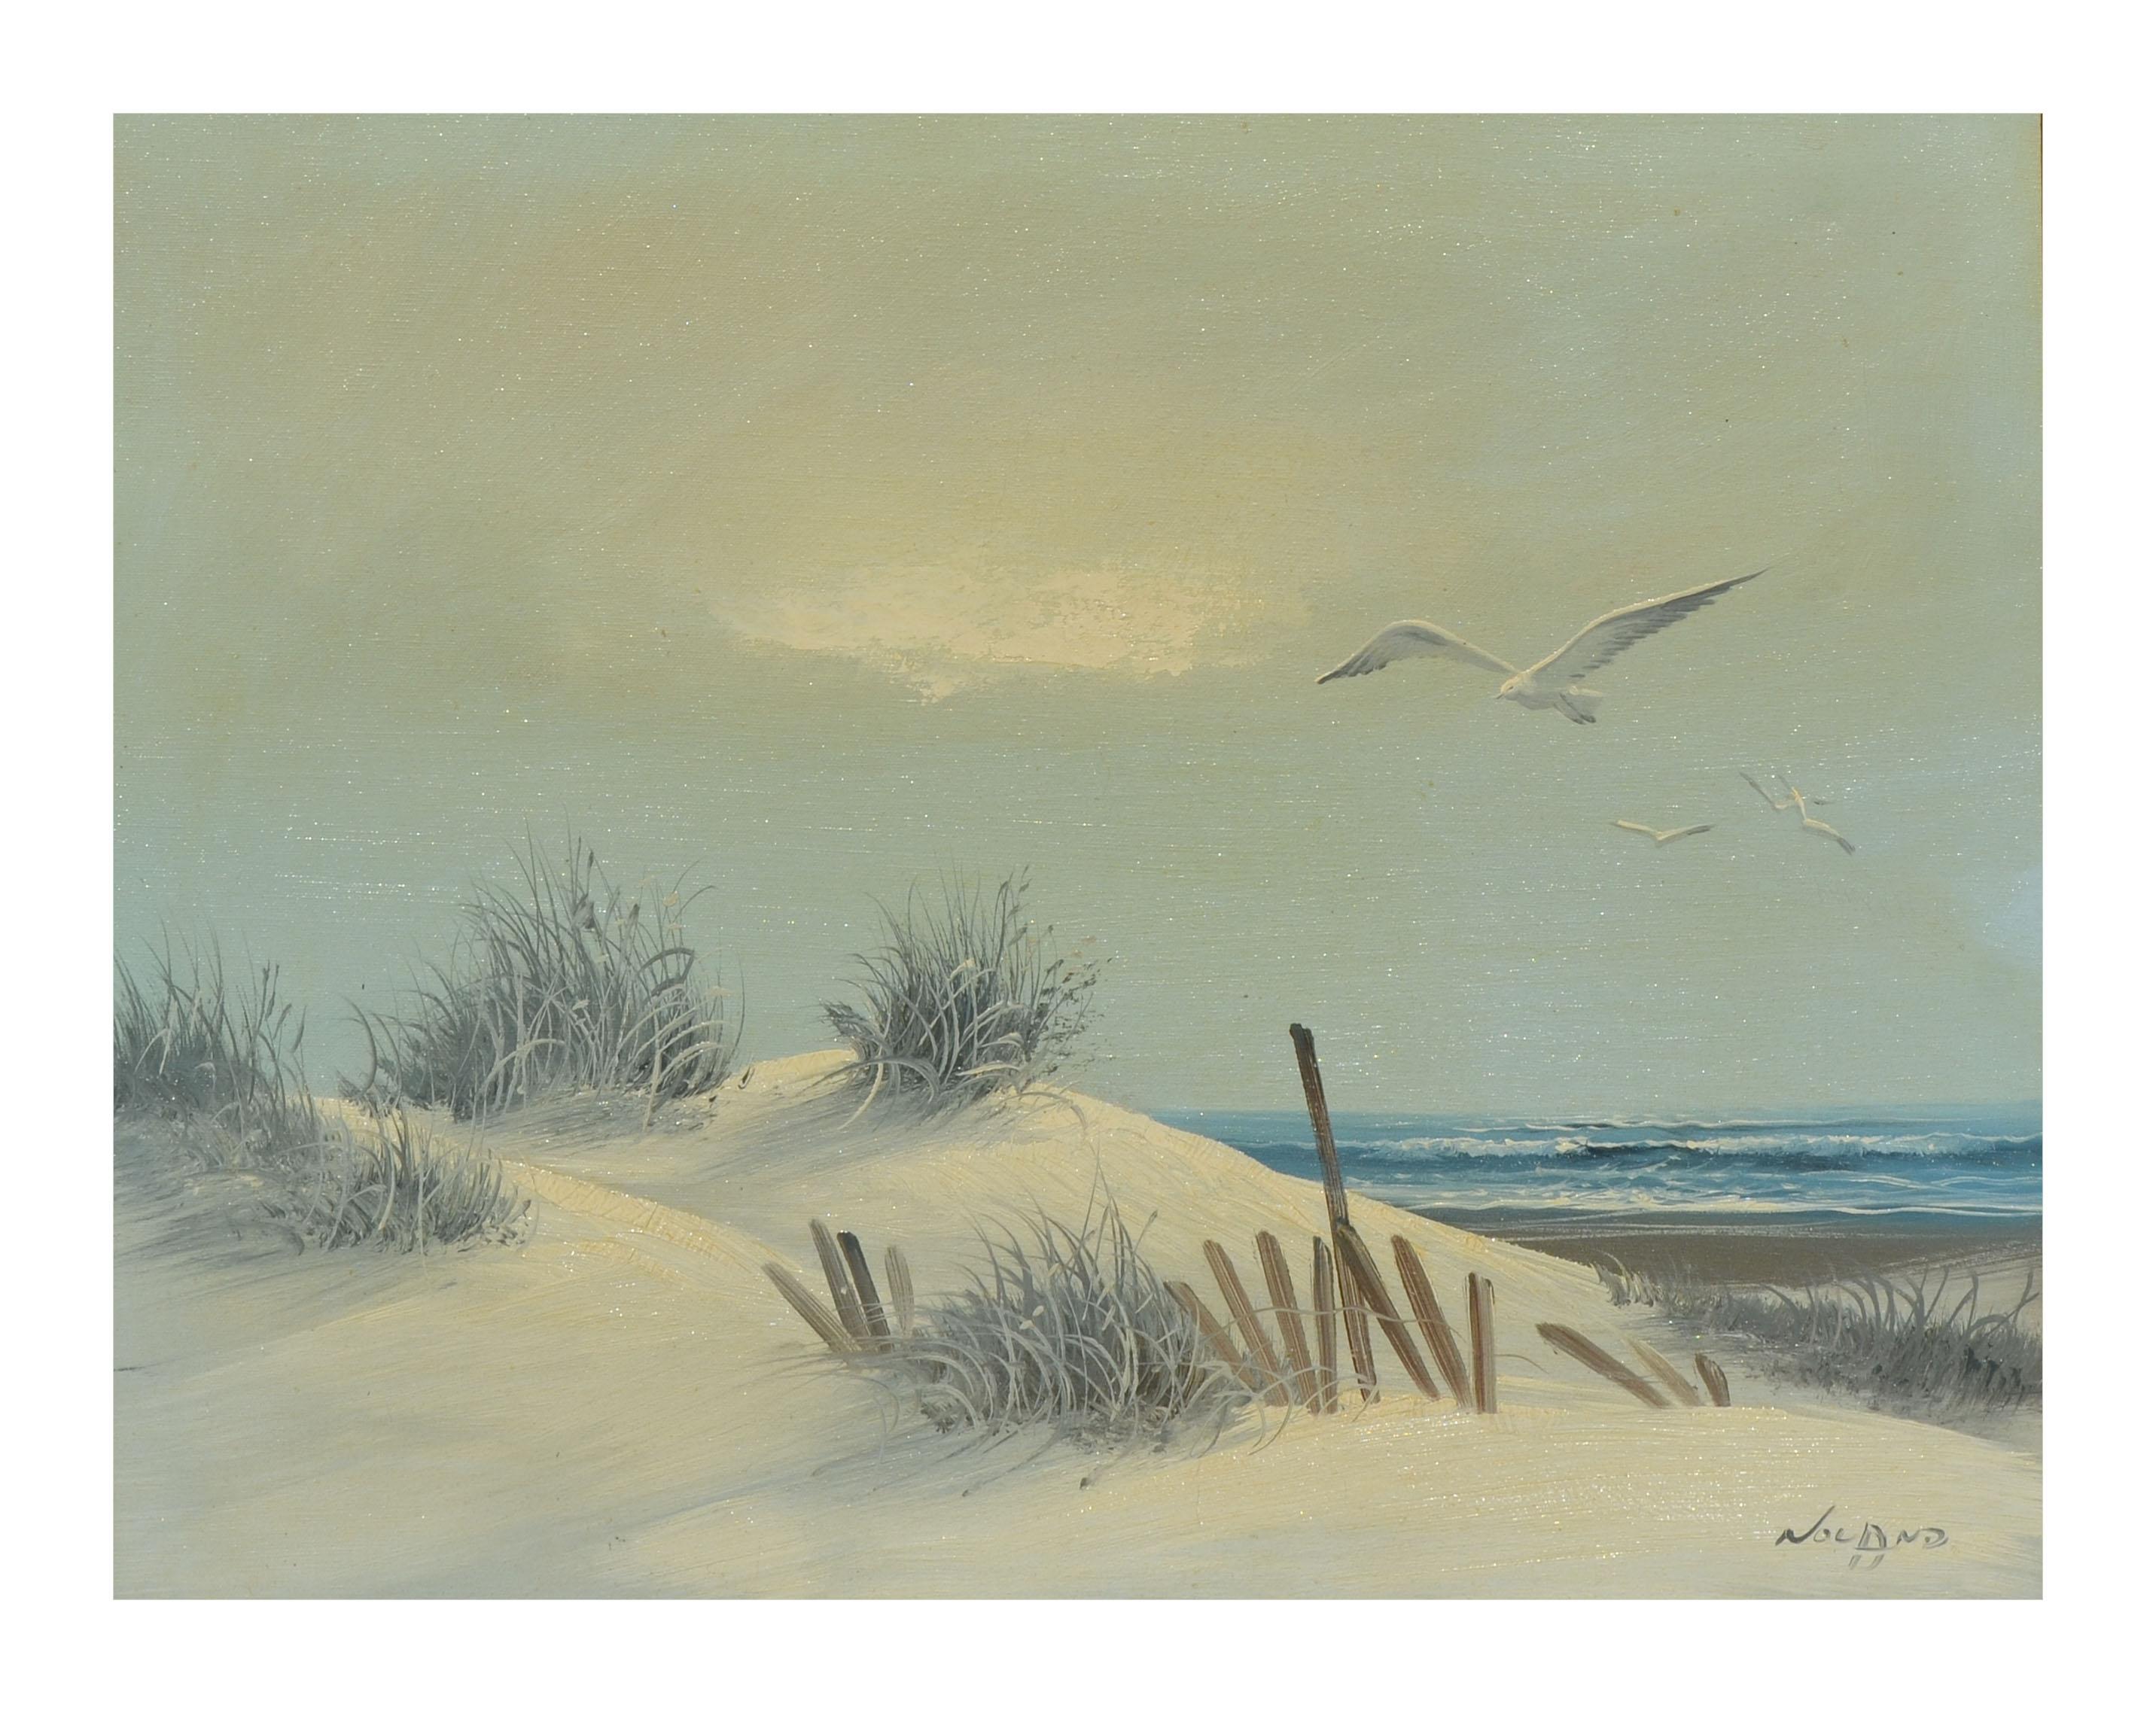 Calm Winds - Peaceful California Seascape - Painting by Noland